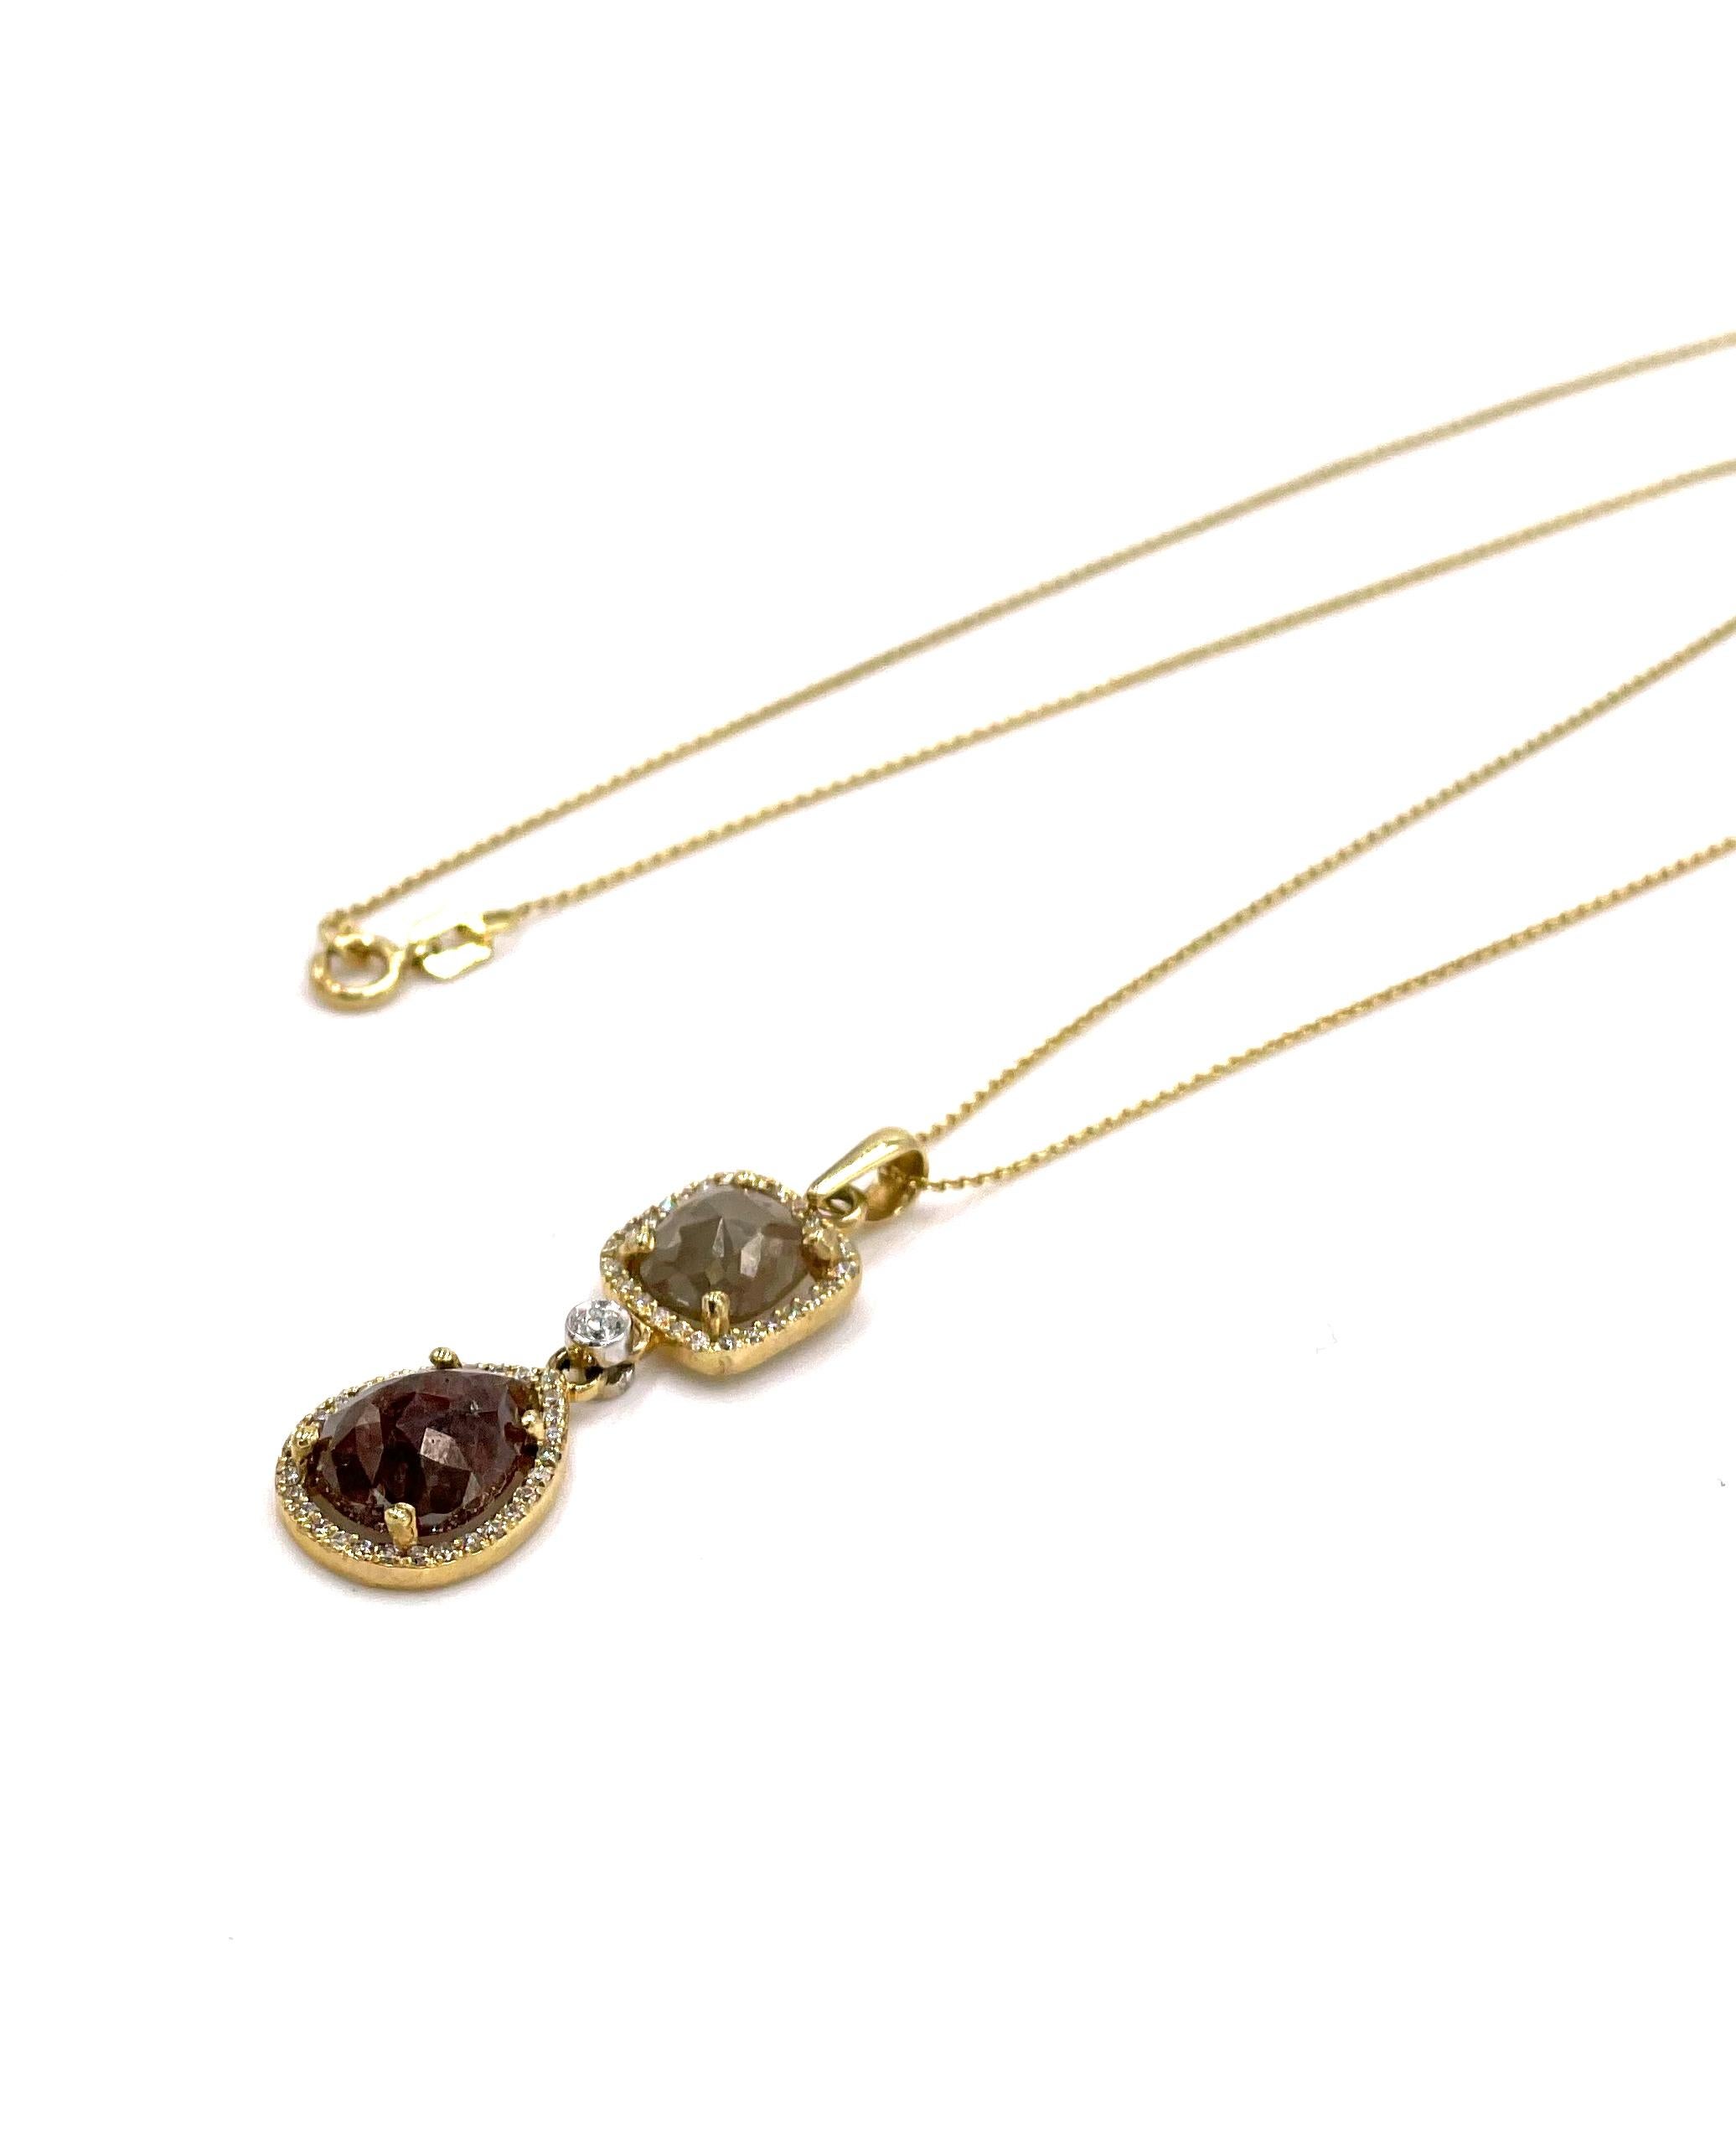 14K yellow gold necklace with one light brown rough cut chocolate diamond and one darker brown pear shape rough cut chocolate diamond.  The brown diamonds are embellished with a halo of round white diamonds.  The pendant slides on a 18 inch cable